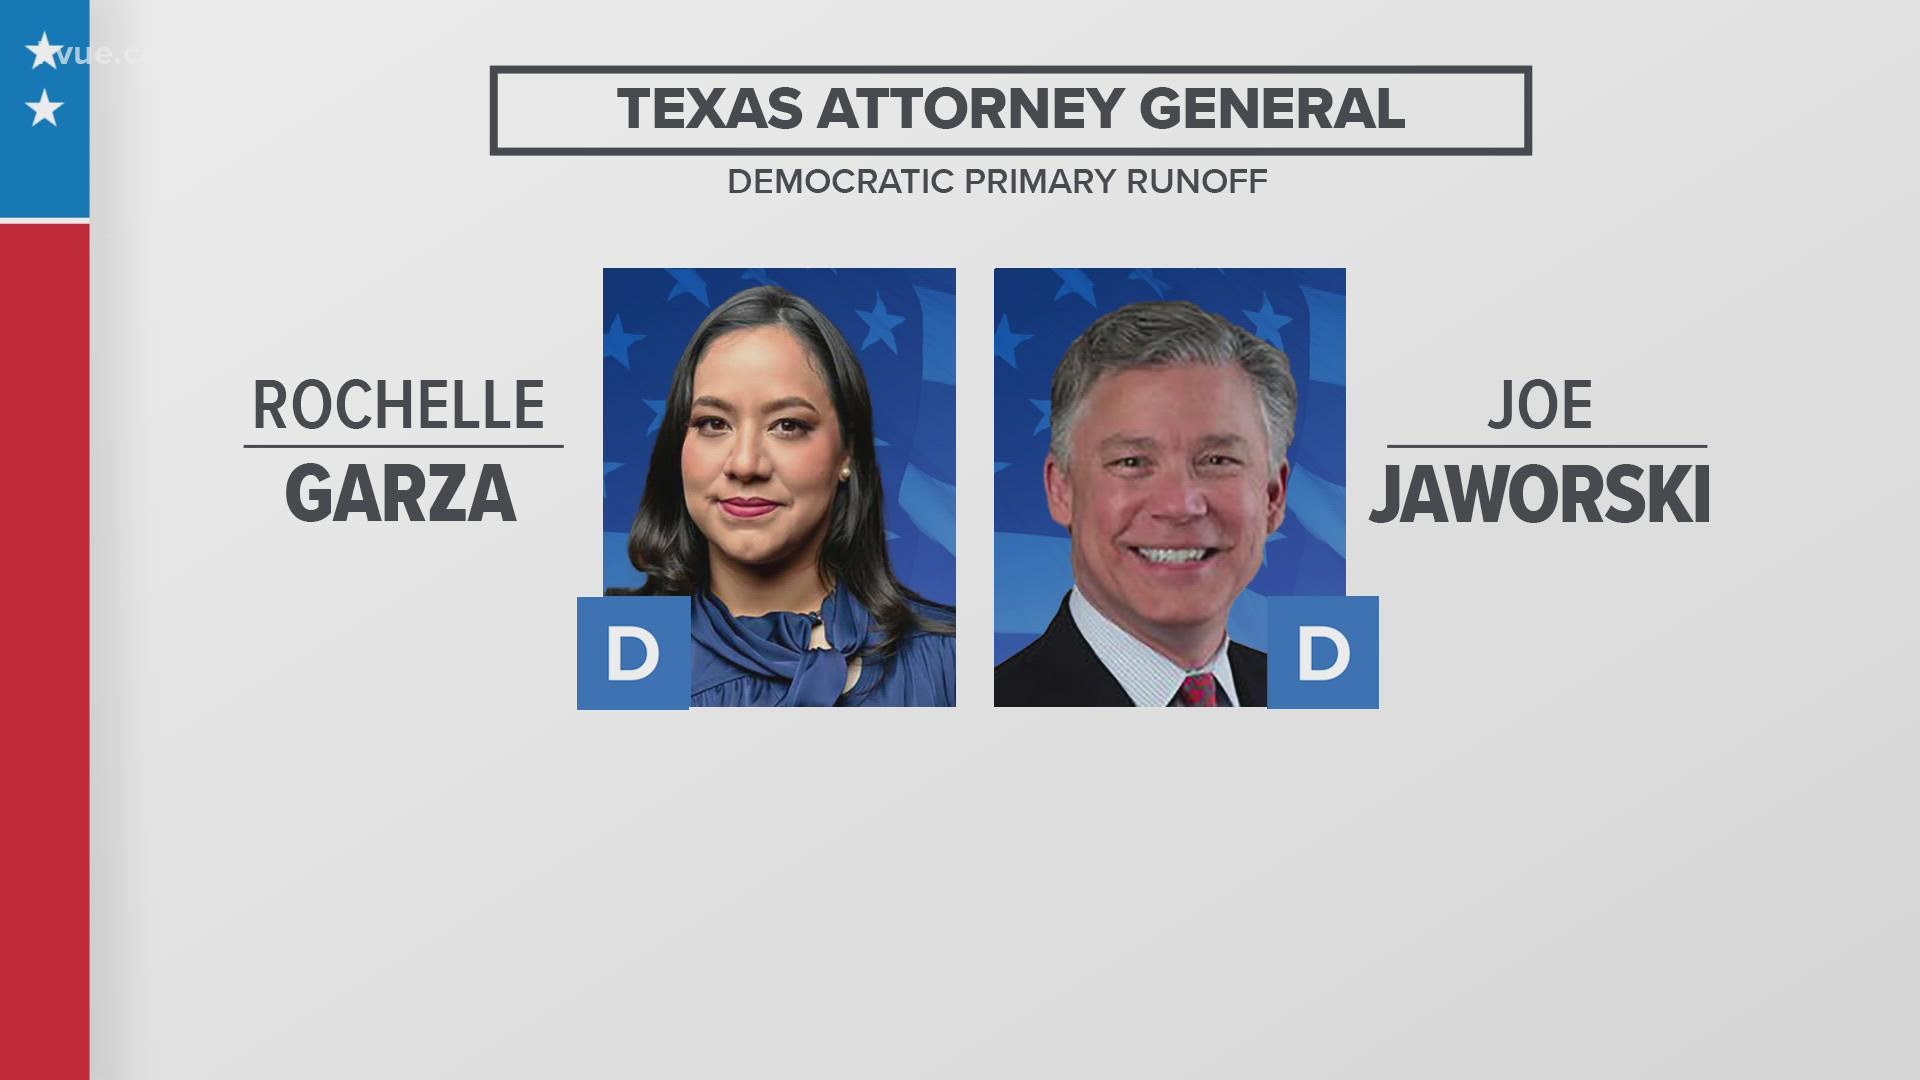 Here is everything you need to know ahead of the May 24 Texas primary runoff election, from where to vote to what's on the ballot.